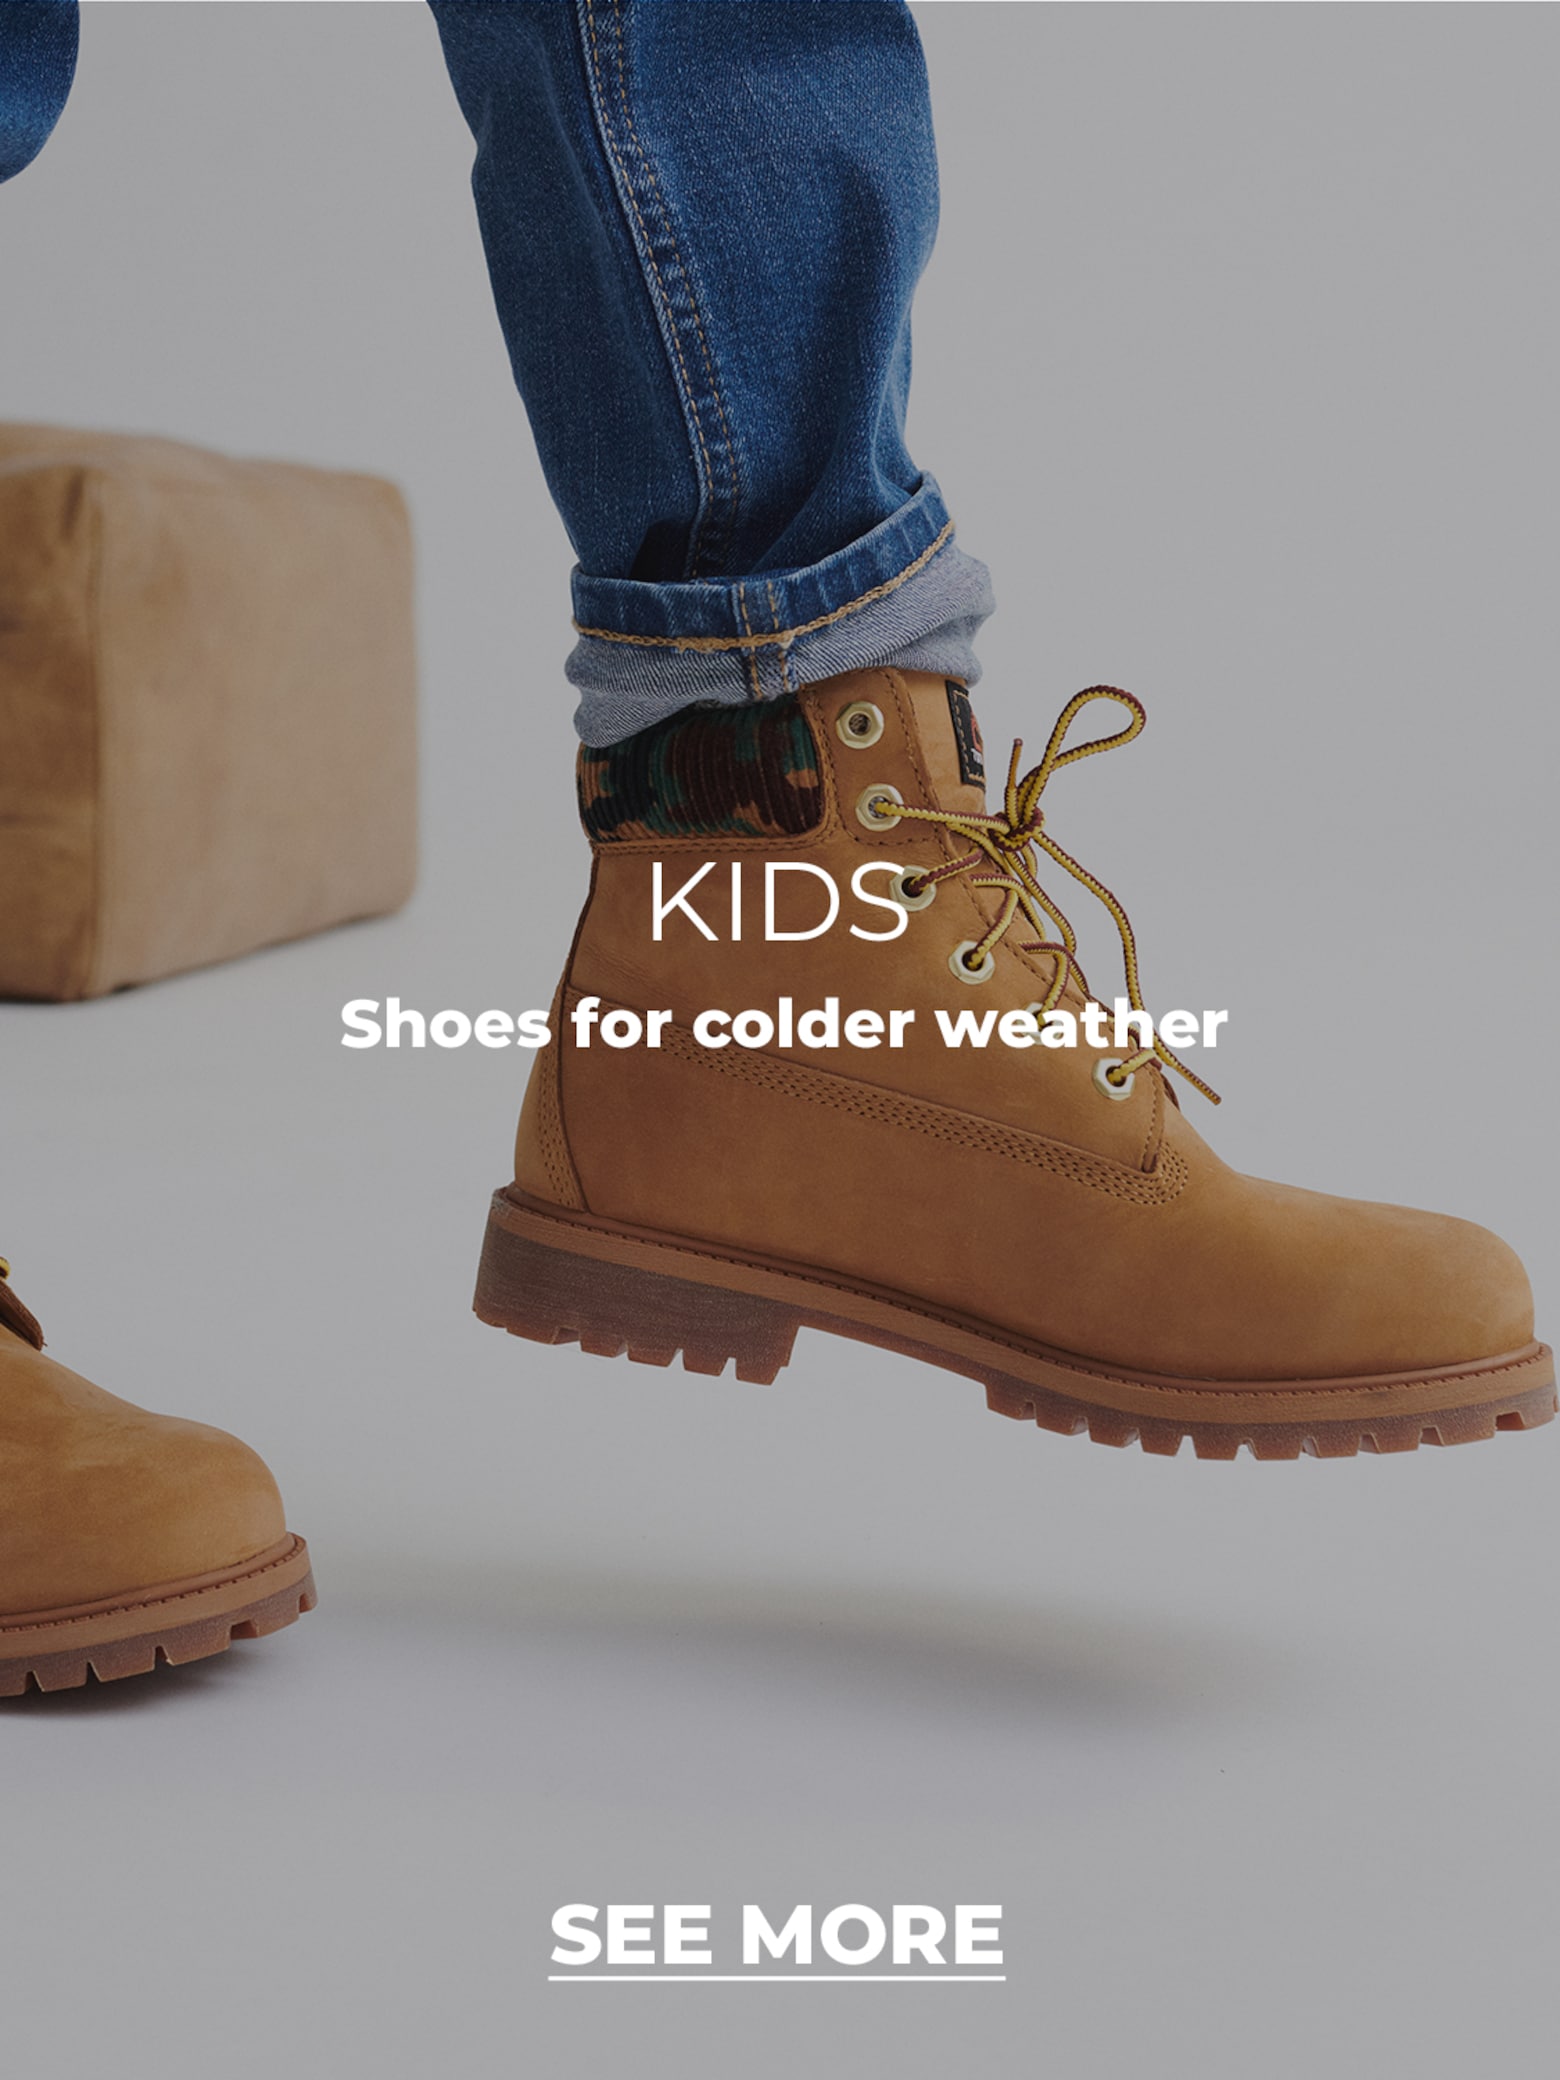 For our boys Clothing for cooler weather